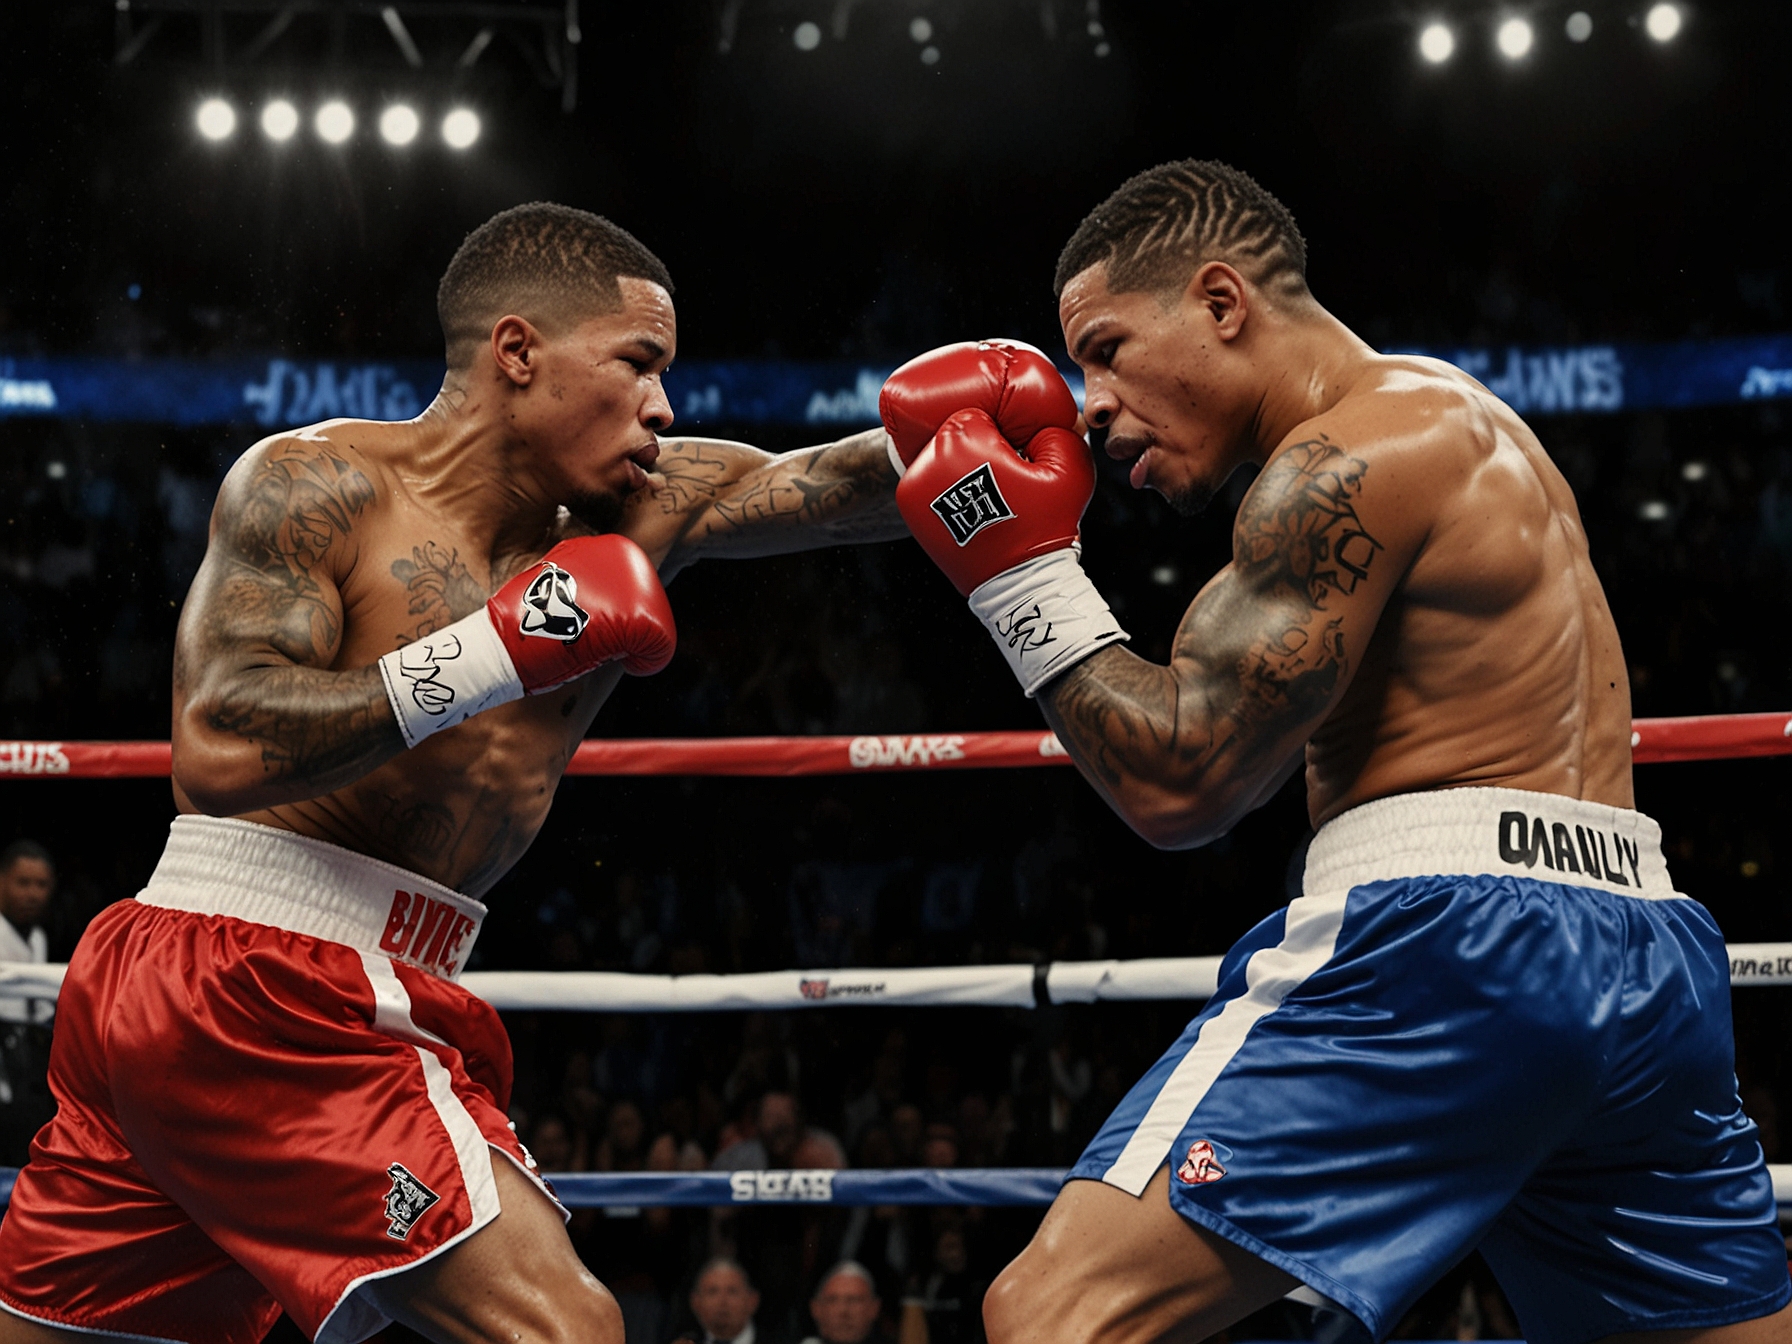 Illustration of Gervonta Davis's knockout punch against Frank Martin, showcasing his power and precision. This sets the stage for O'Malley's prediction and the anticipated fight.